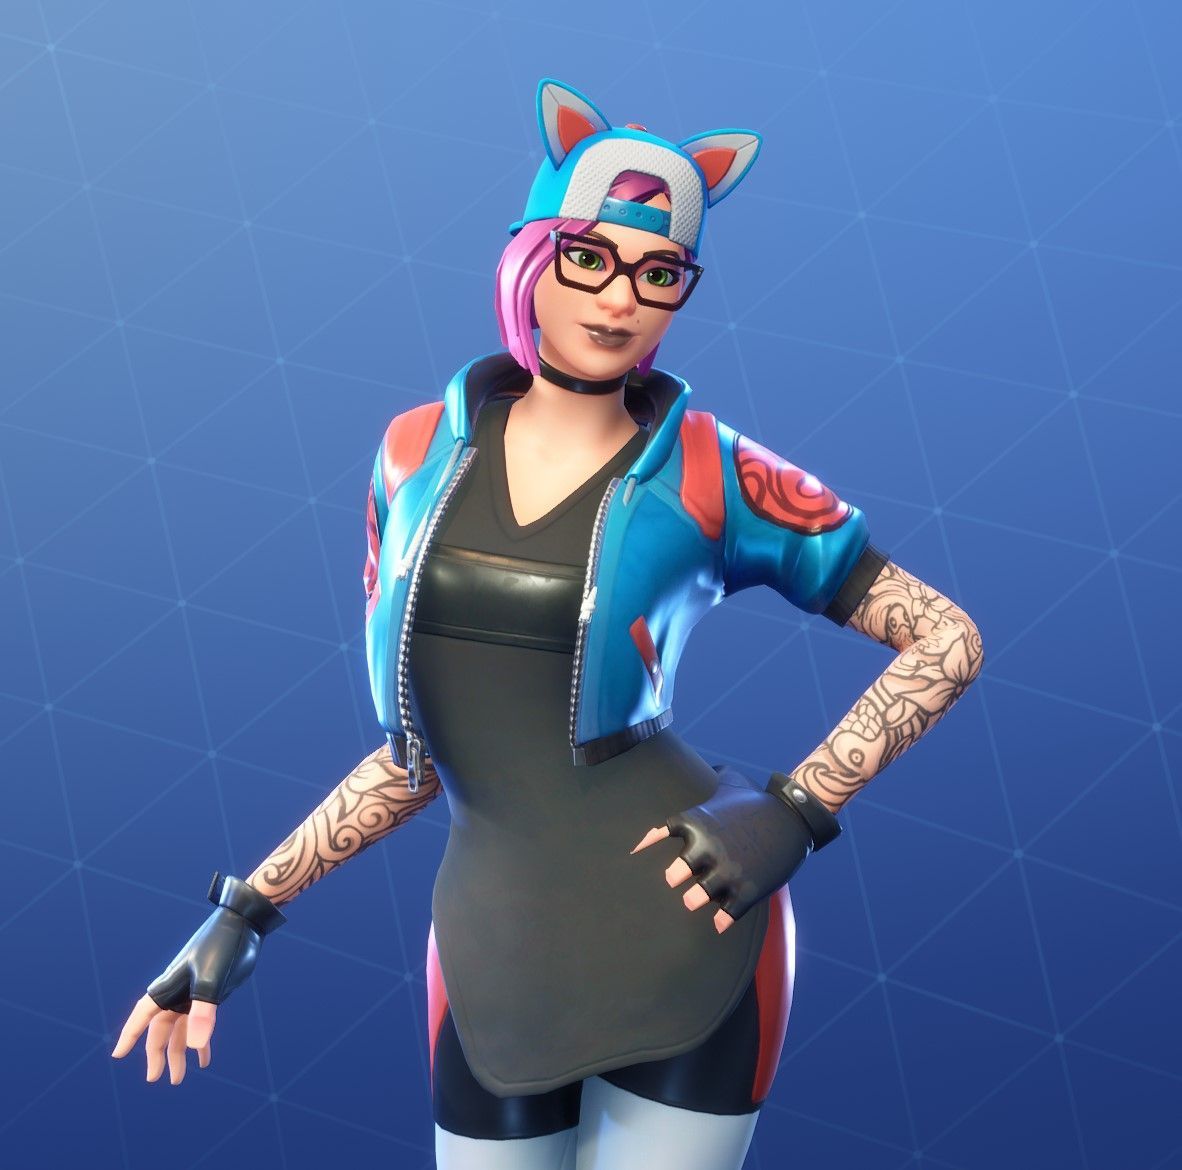 We can't have emotes because of “clipping” but Lynx can access her